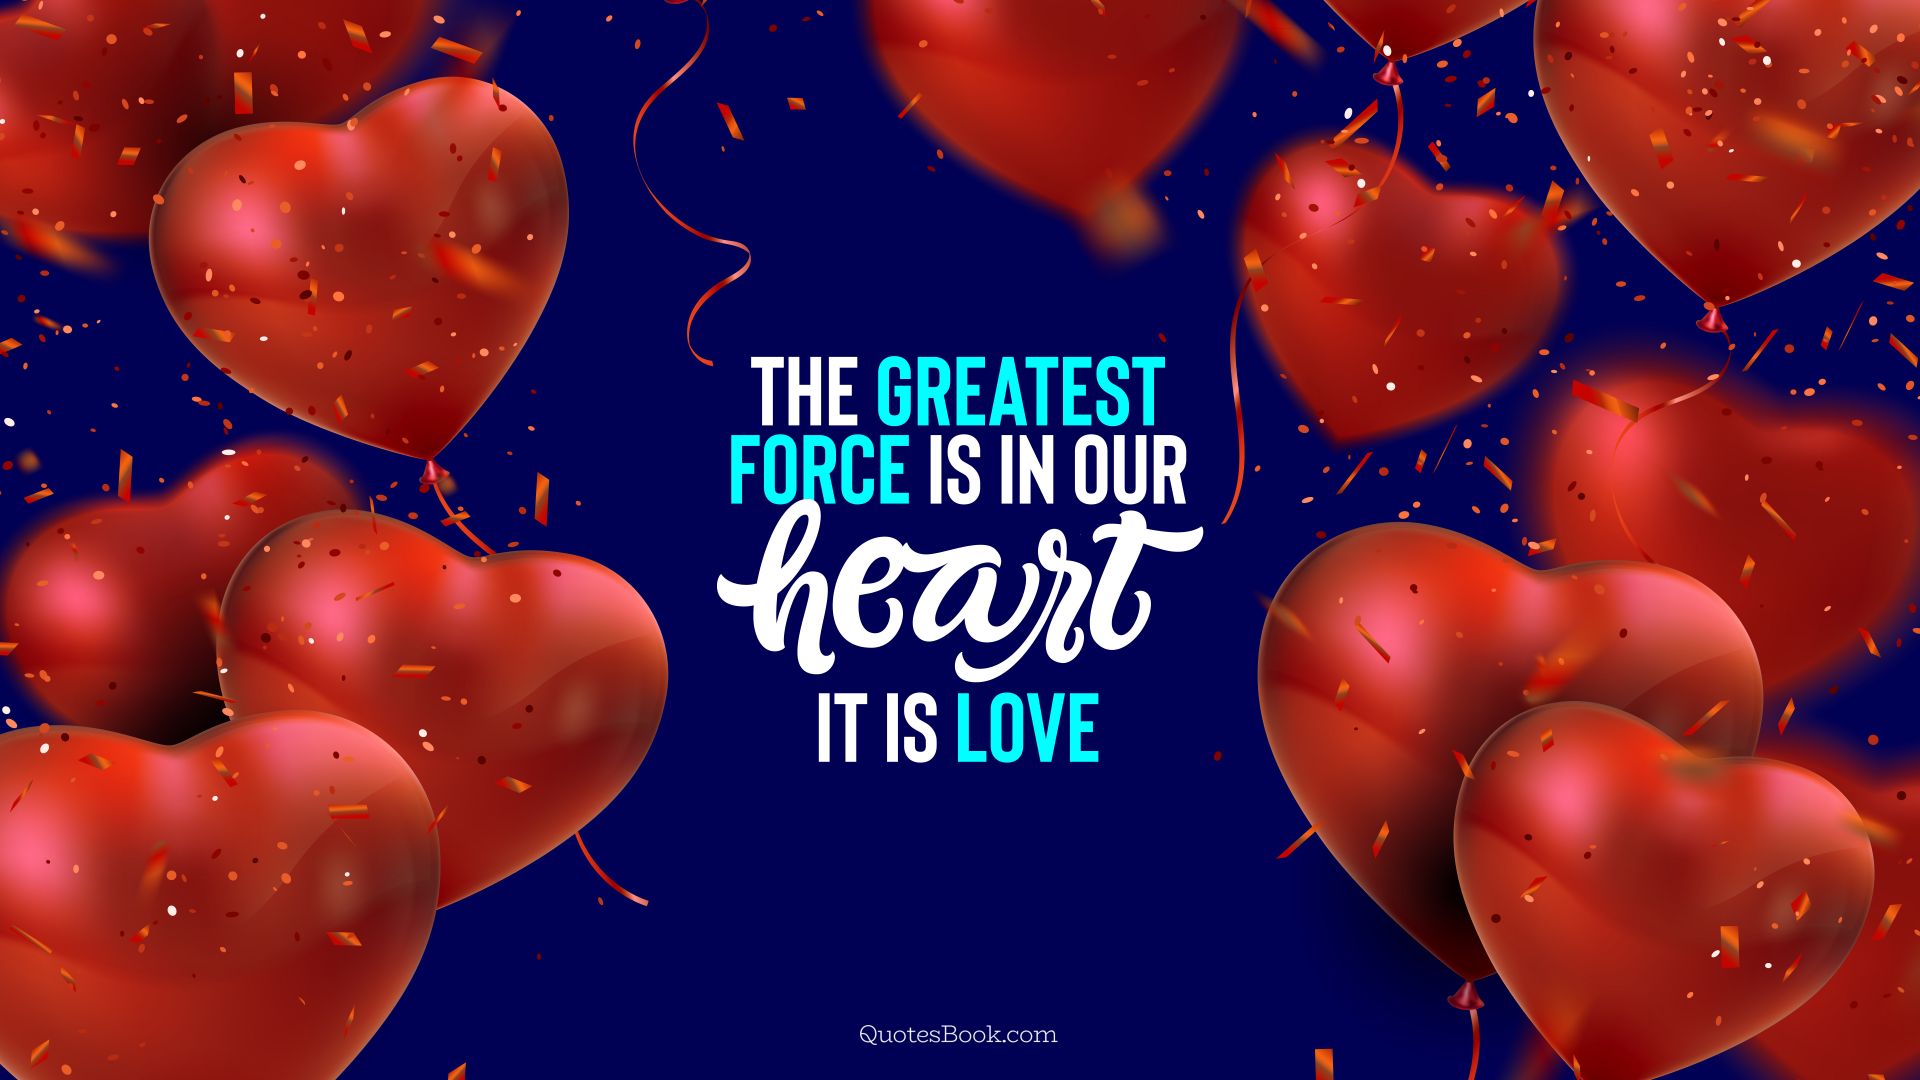 The greatest force is in our heart. It is love. - Quote by QuotesBook